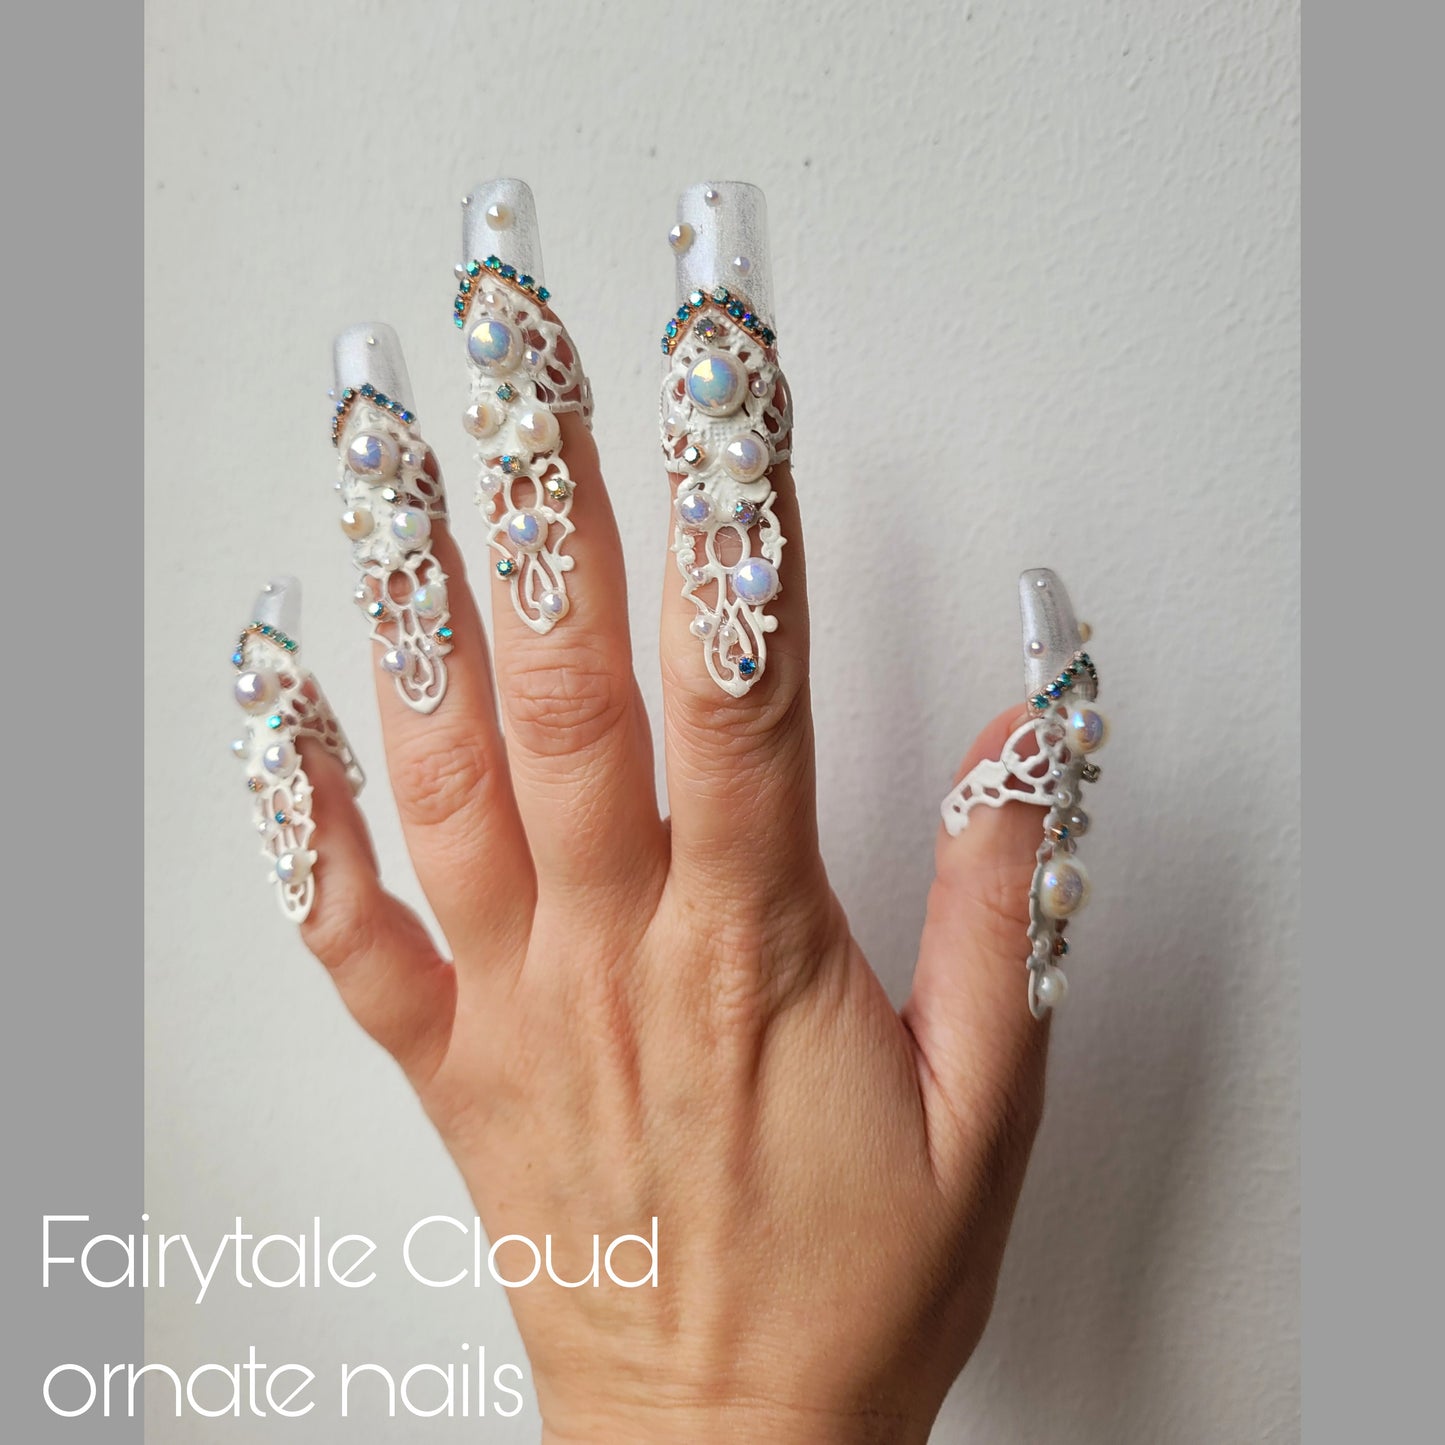 Made-to-order: the Fairytale Cloud ornate nails